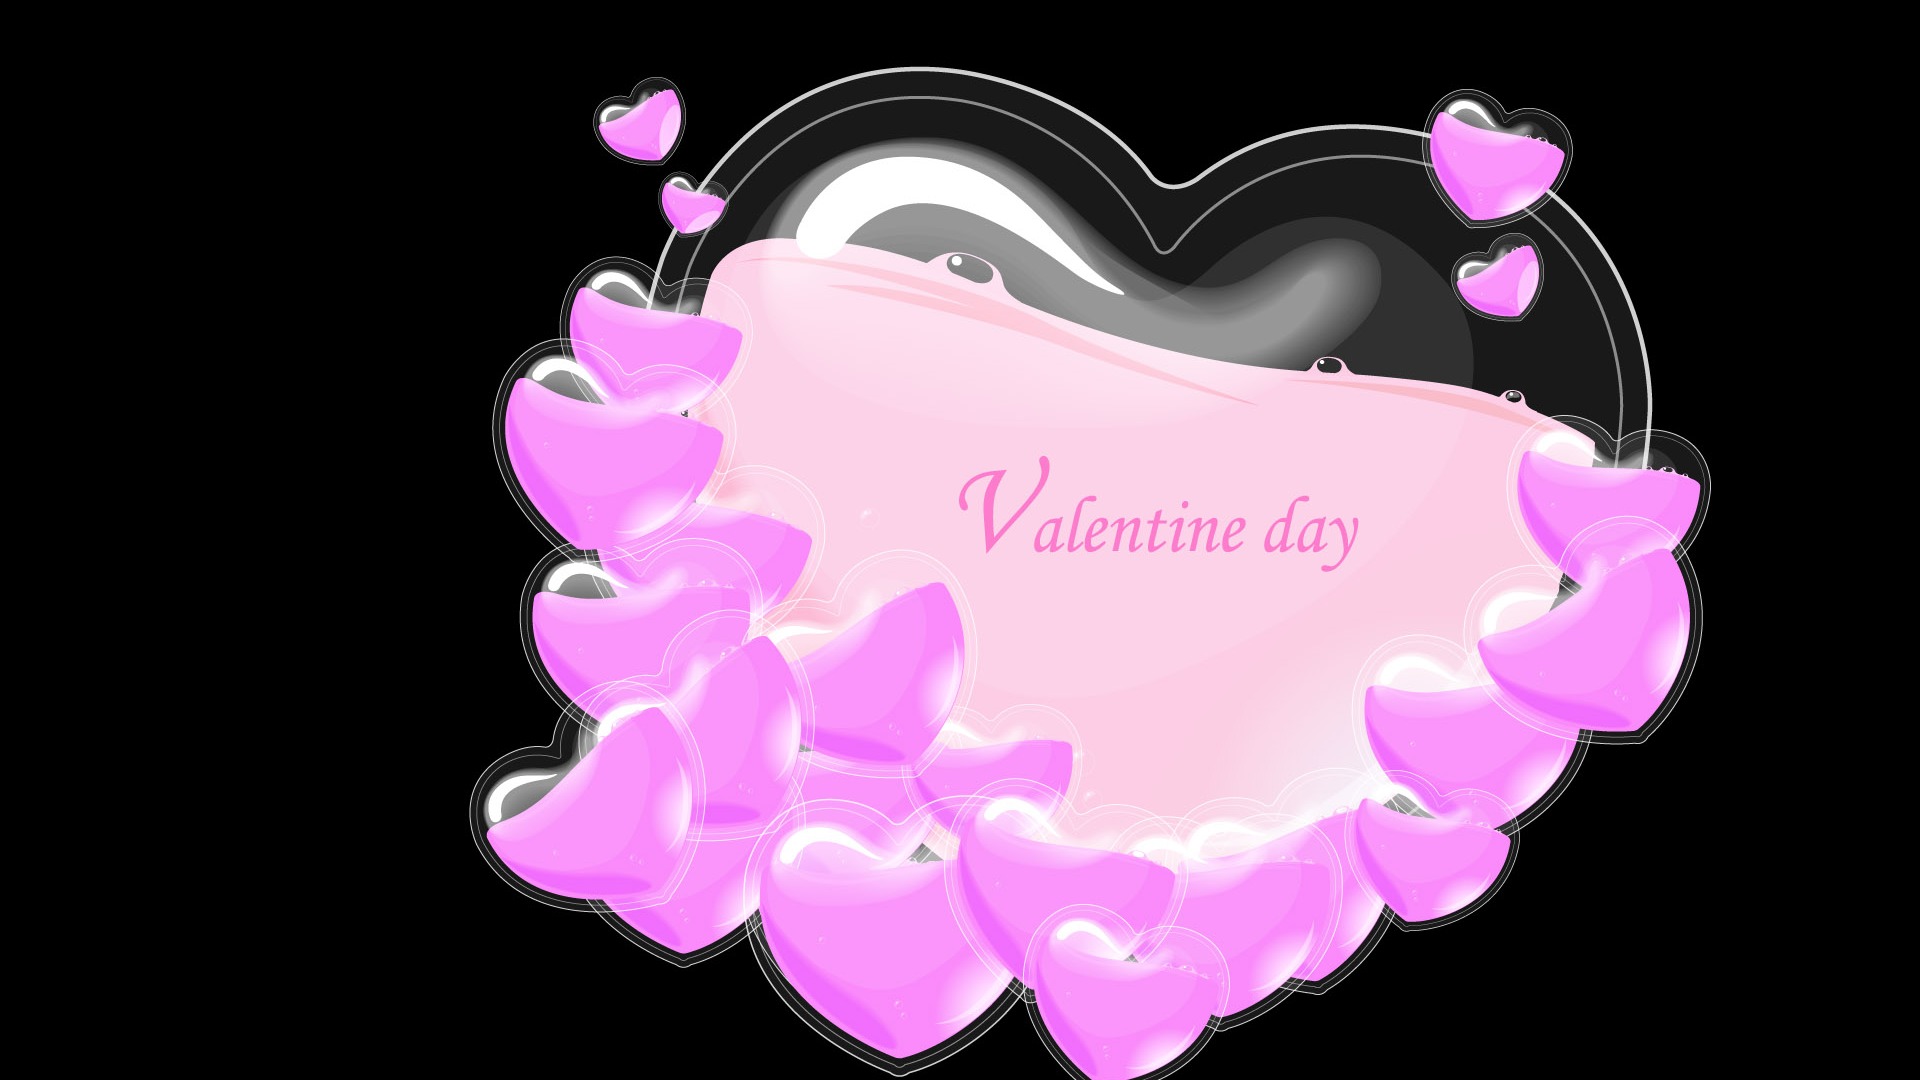 Valentine's Day Theme Wallpapers (2) #8 - 1920x1080